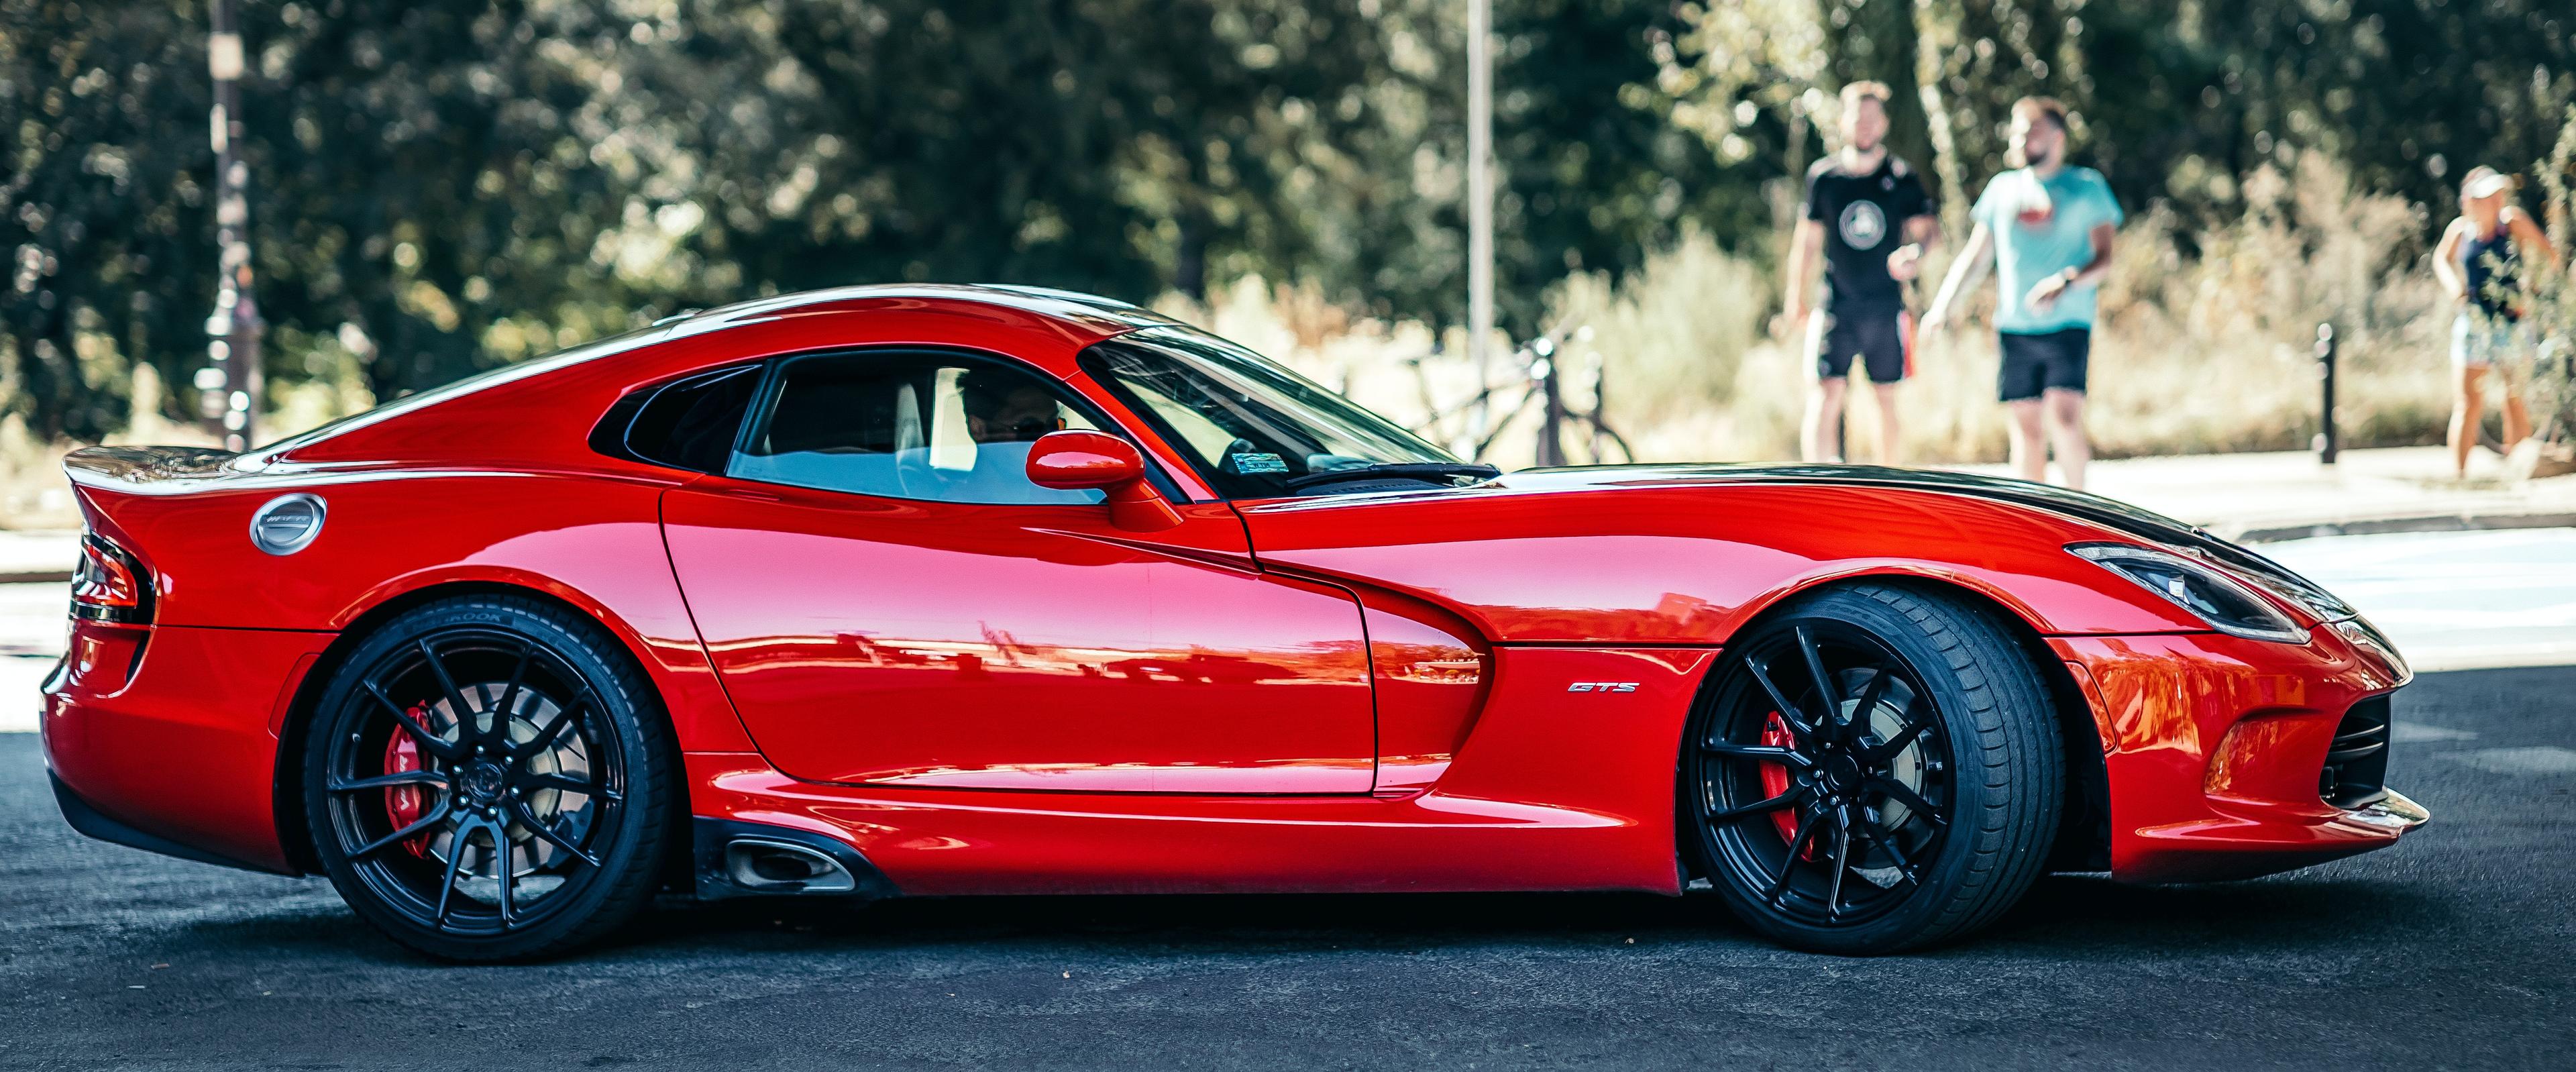 The Dodge Viper was discontinued in 2017, but gearheads are hoping it could return as soon as next year.